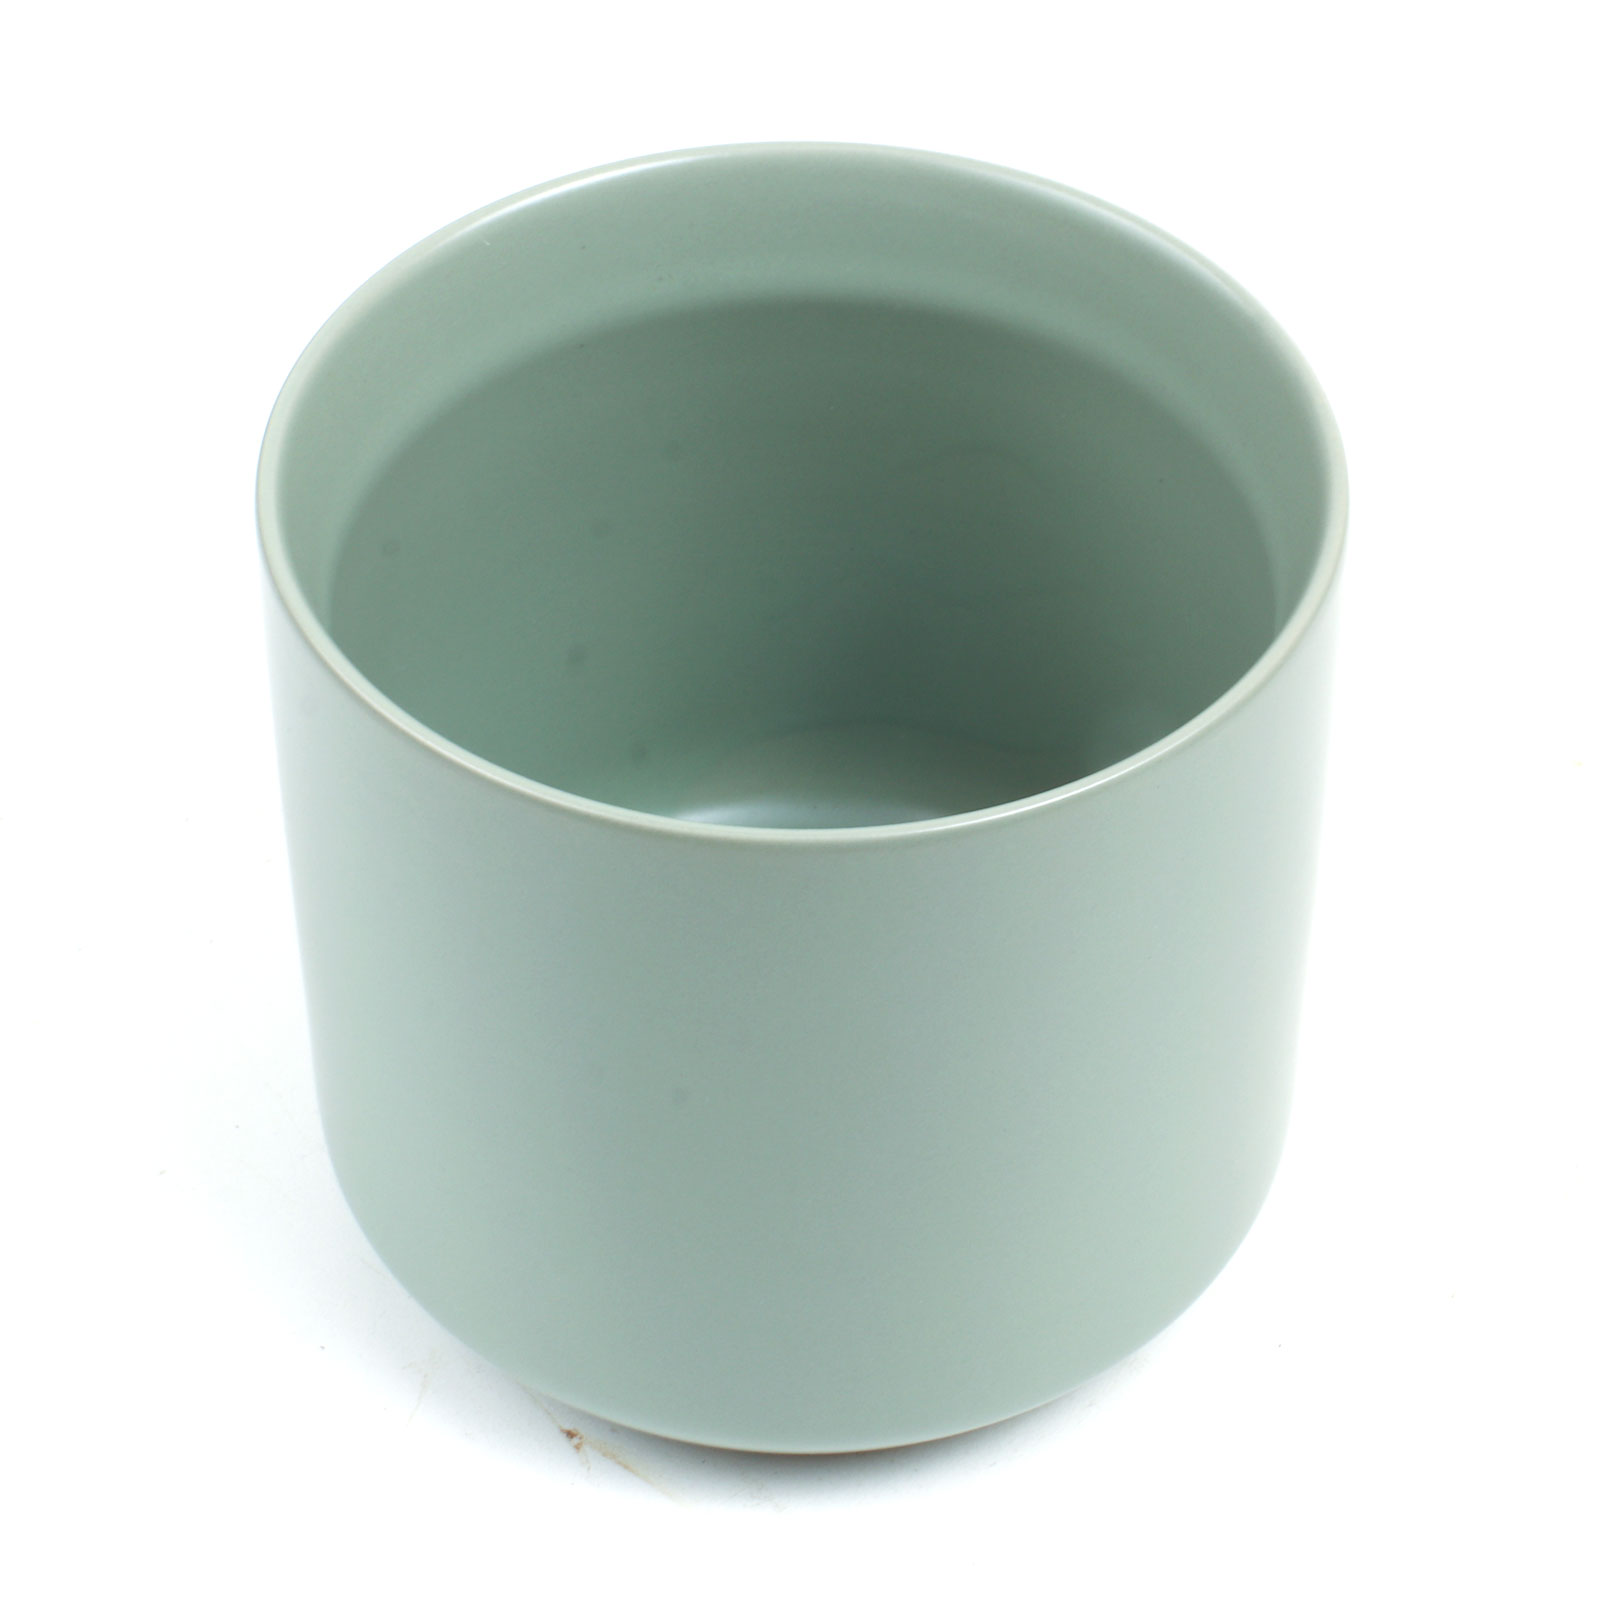 Kendall Pot 4.5" x 4.5" Questions & Answers